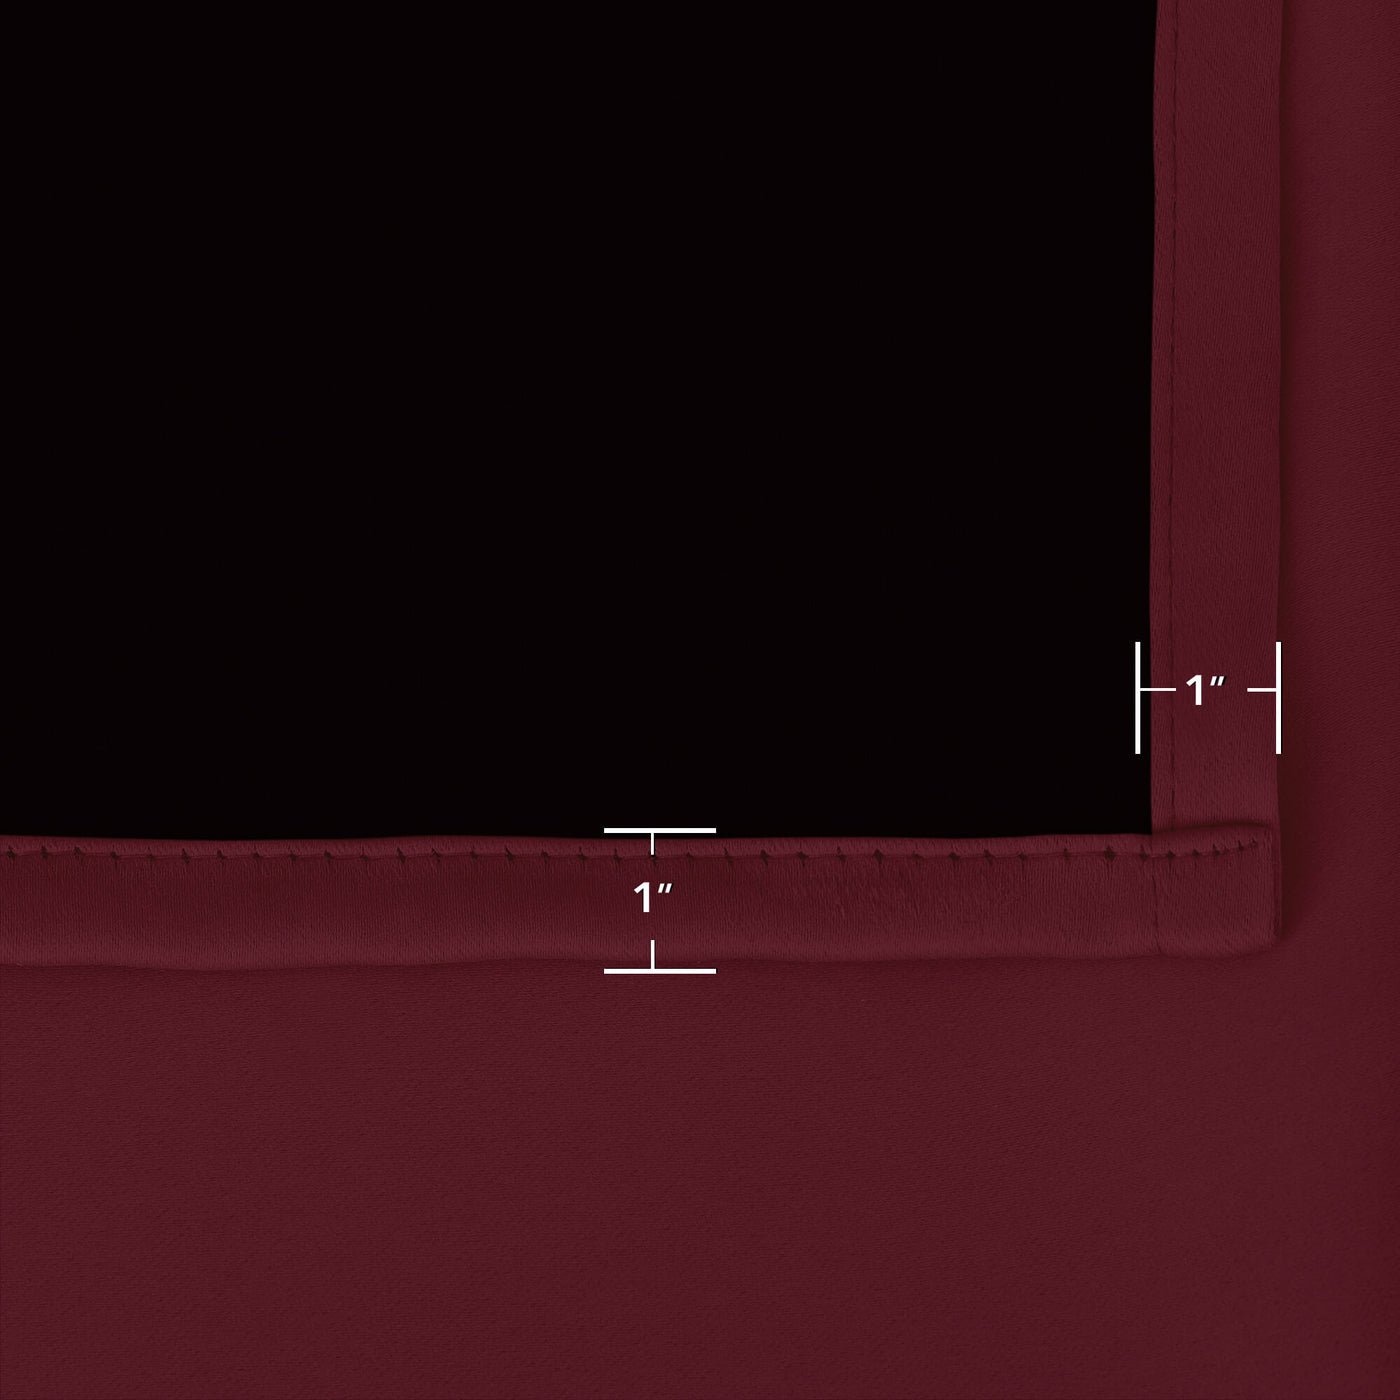 Heartcosy Blackout Curtains Wine Red - Grommet Top